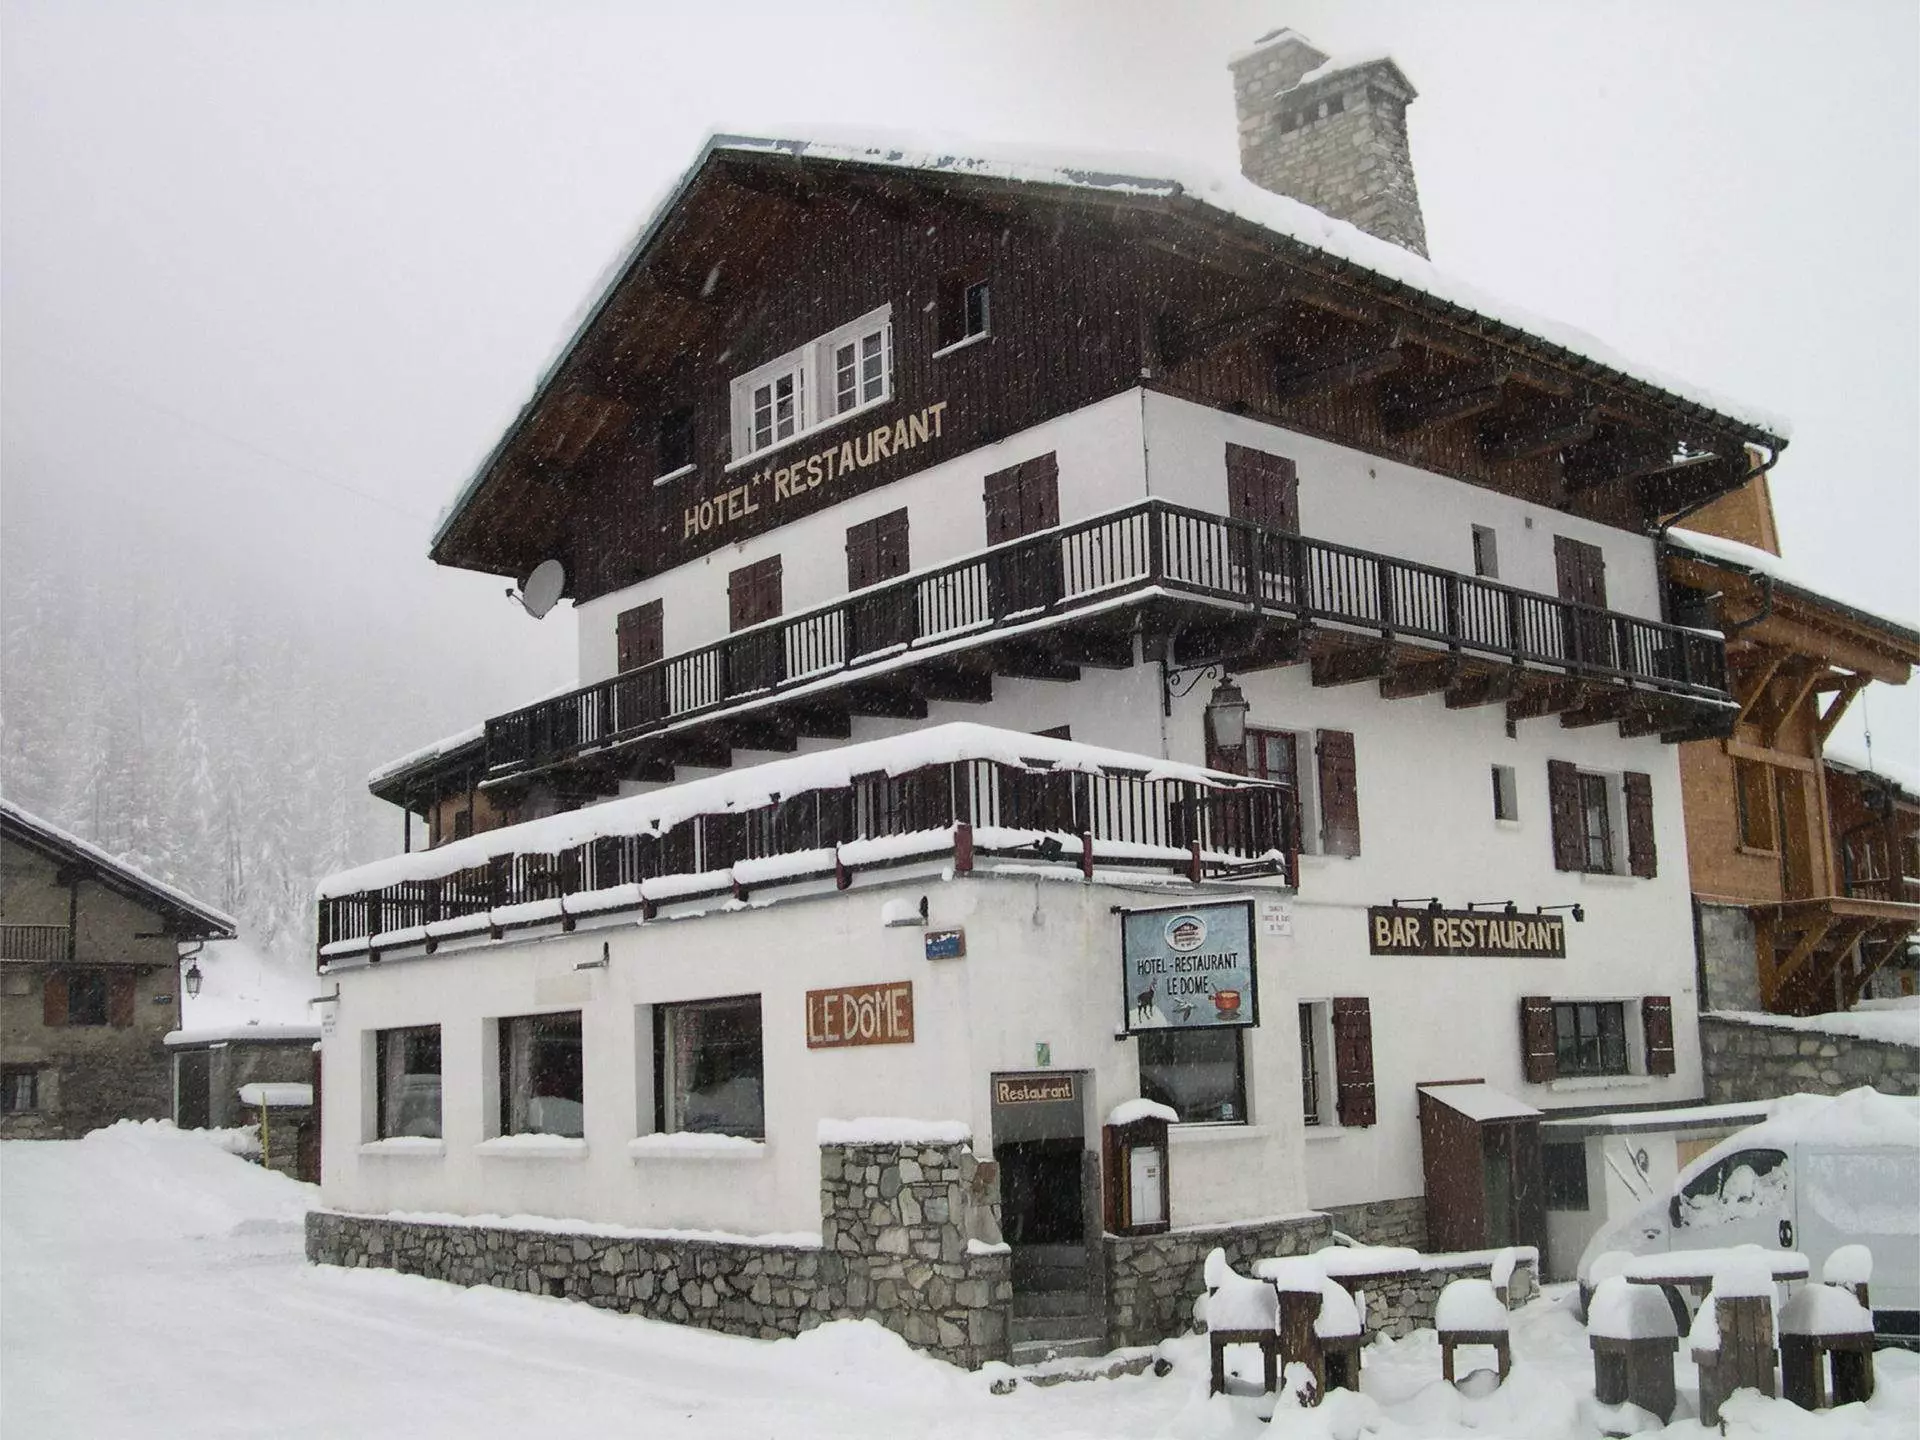 Chalet Hotel le Dome